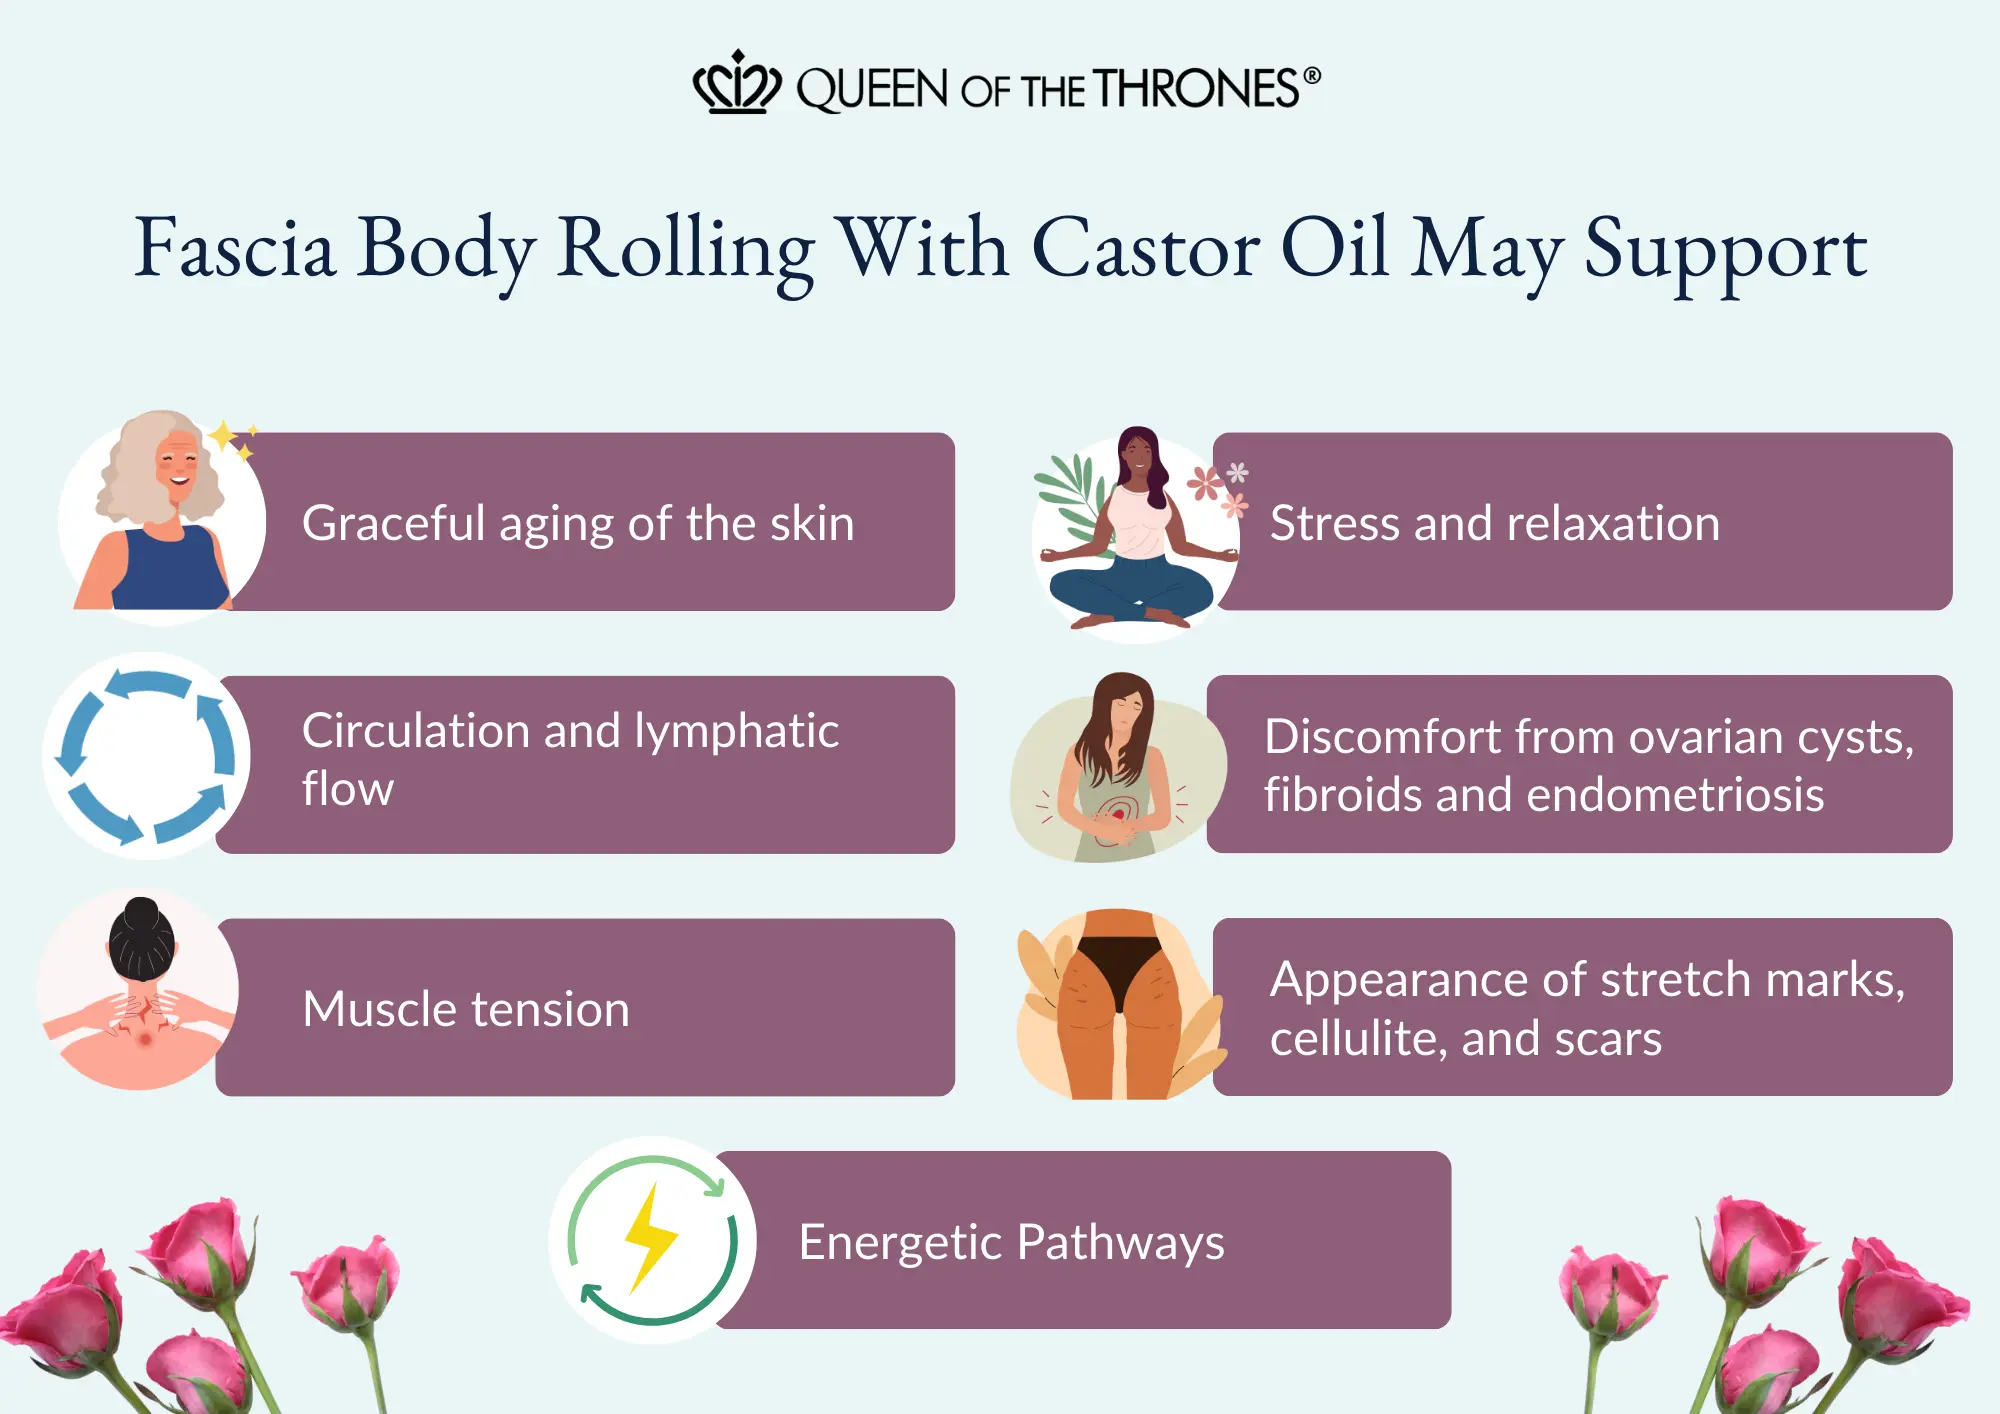 Queen of the Thrones Fascia Body Rolling with Castor Oil Supports